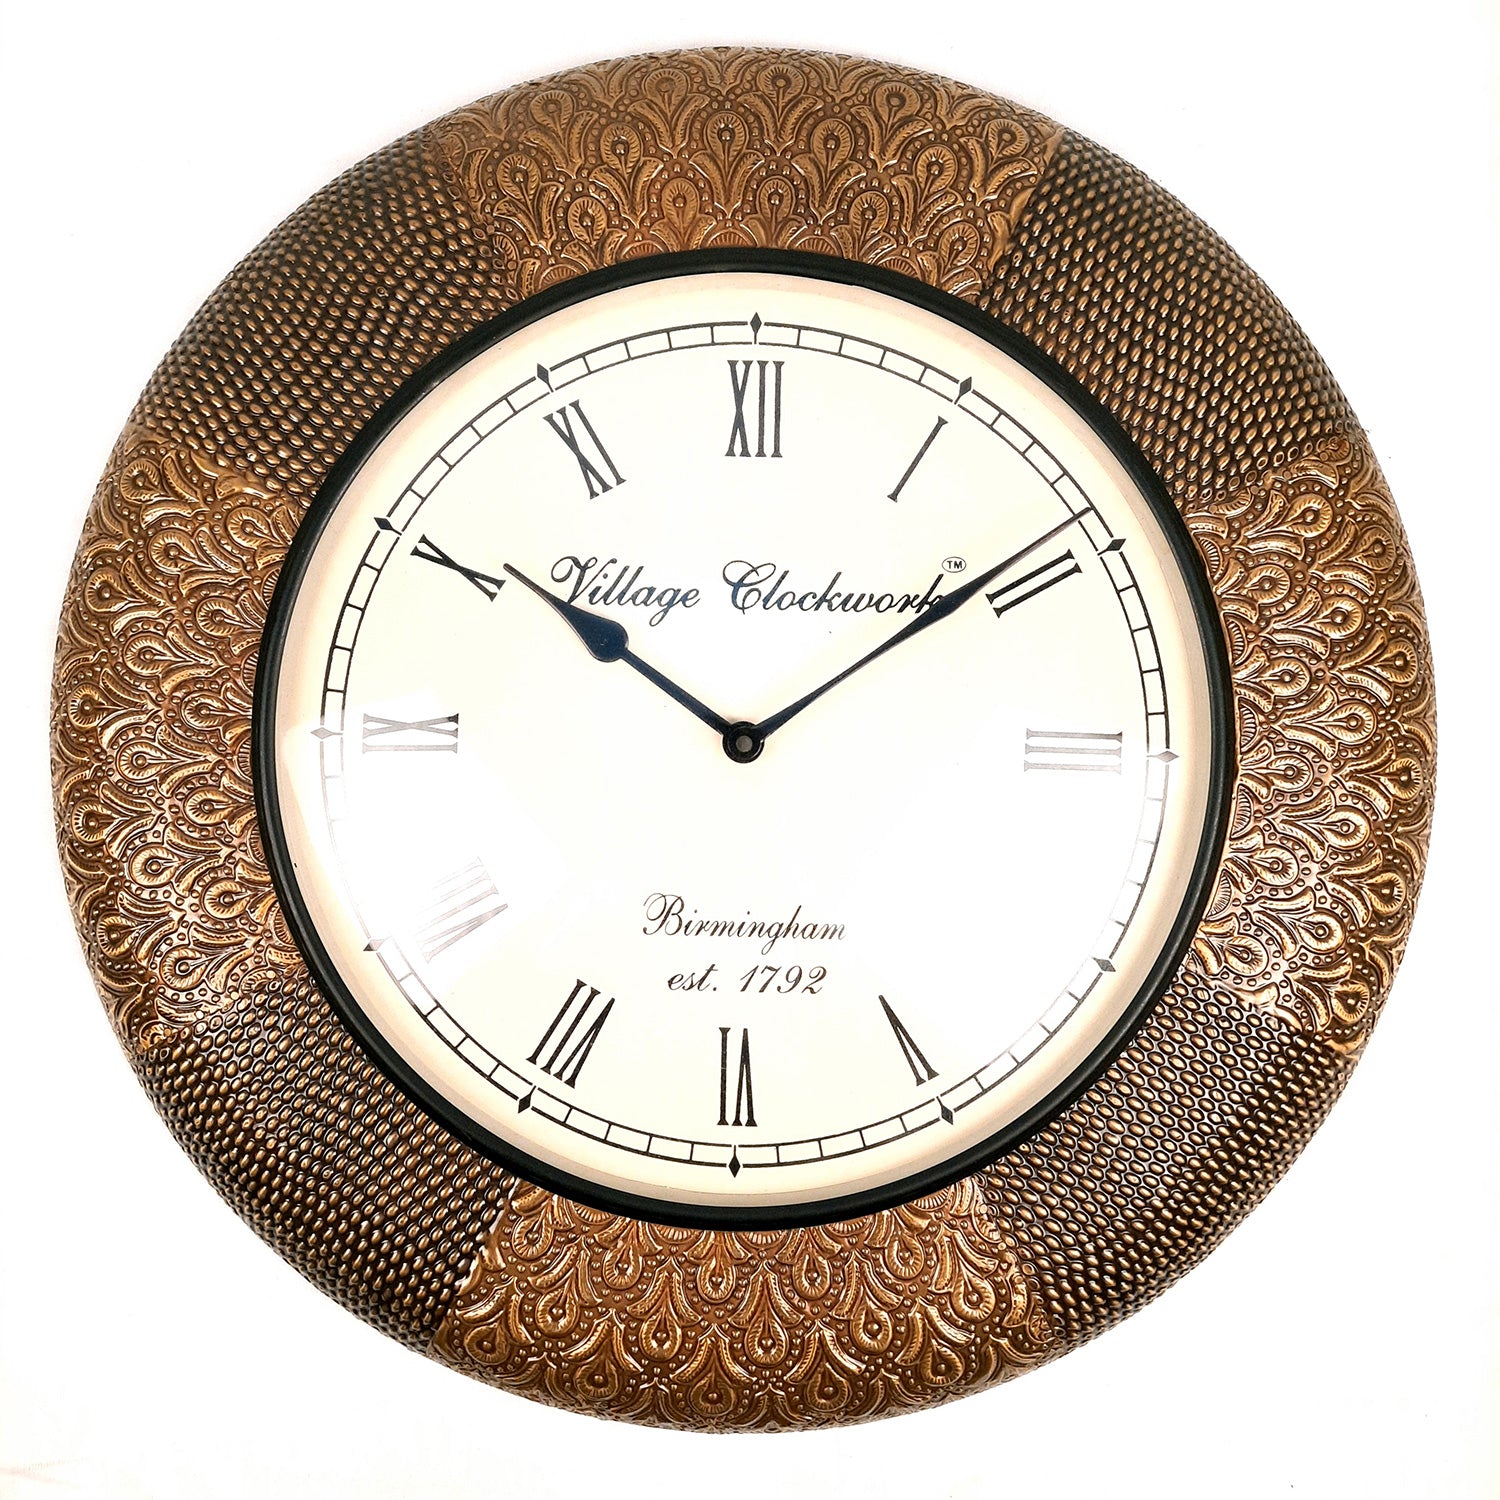 Wall Clock Vintage for Living Room | Wall Mount Clock Antique With Premium Wood & Brass Finish - For Home, Office, Bedroom, Hall Decor & Gifts | Wedding & Housewarming Gift - 18 Inch